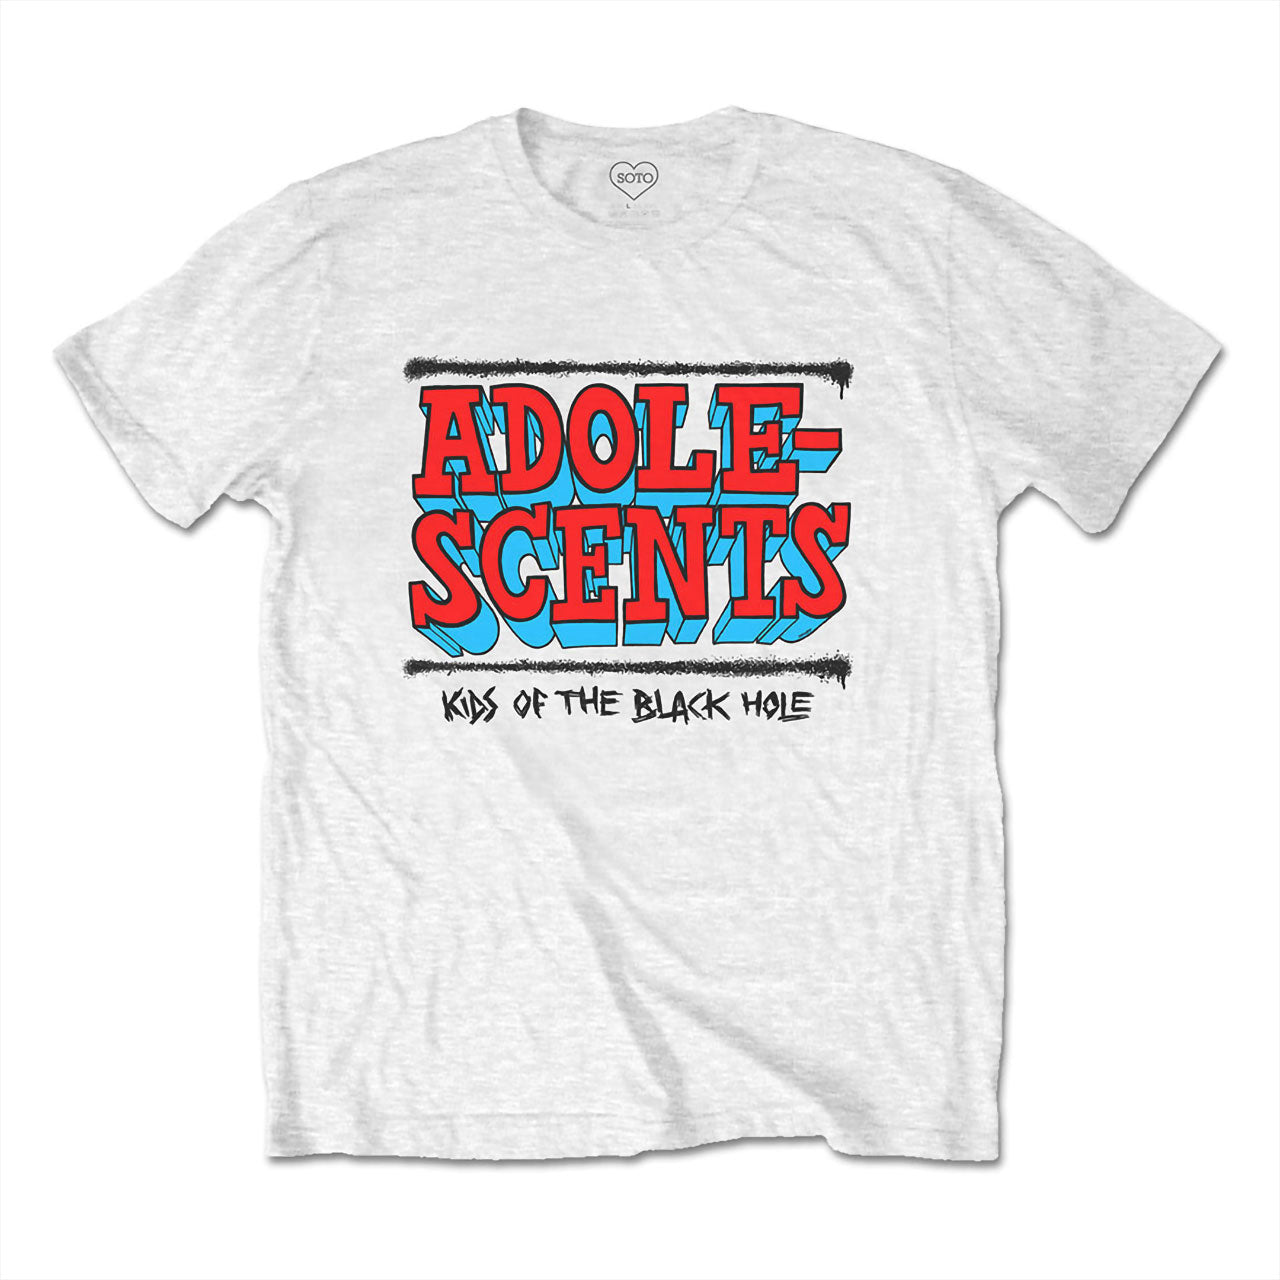 Adolescents - Kids of the Black Hole (White) (T-Shirt)